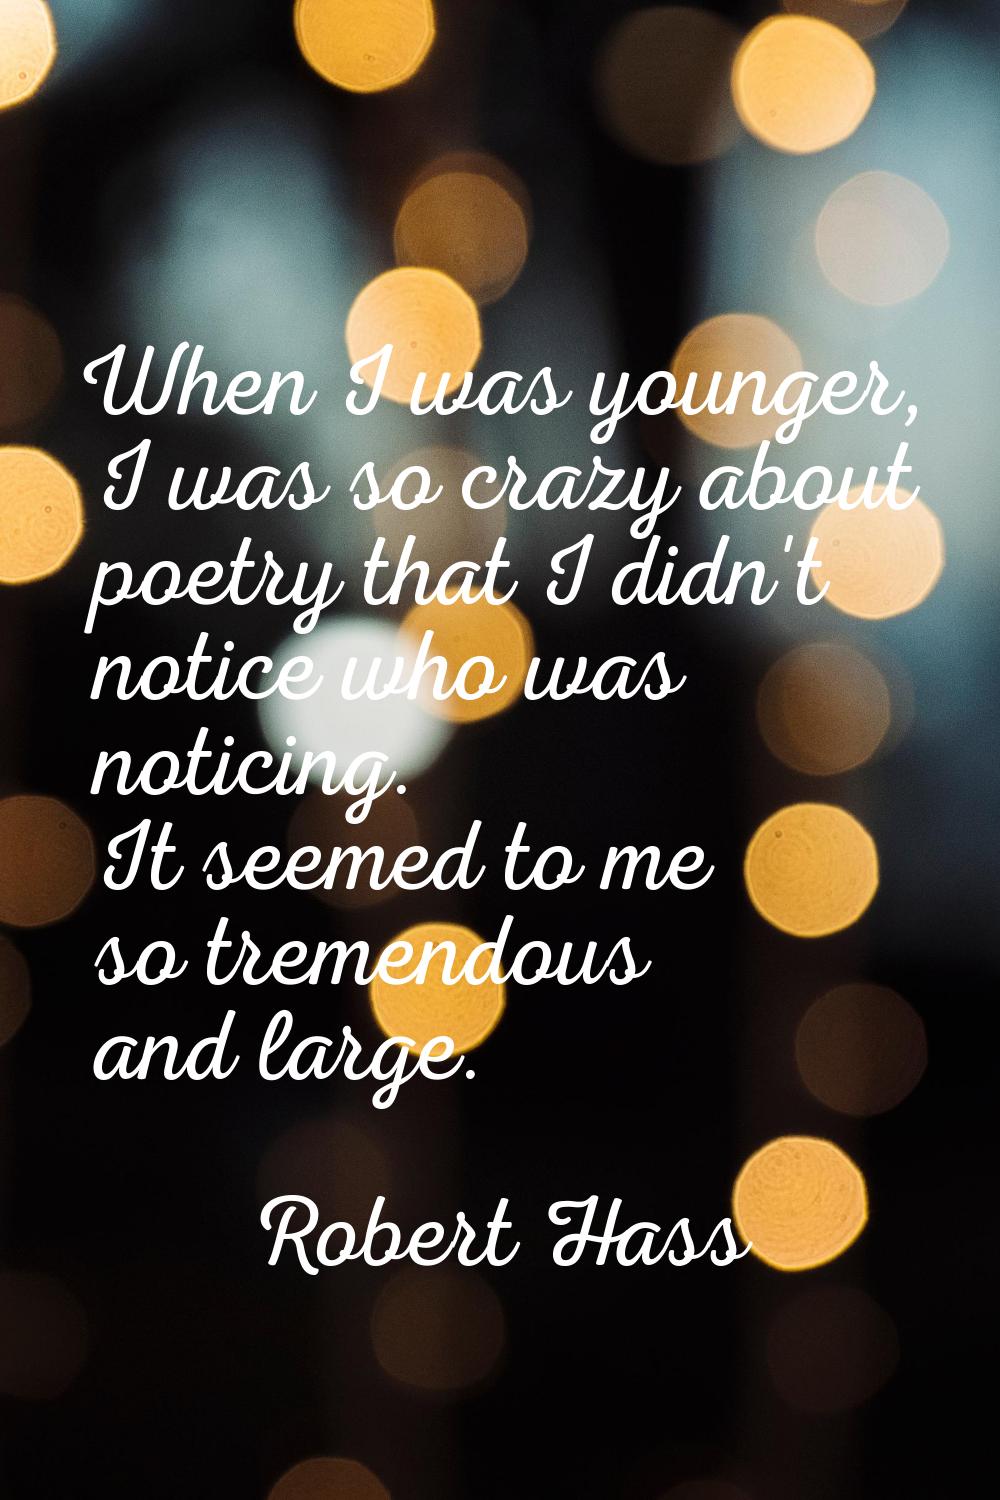 When I was younger, I was so crazy about poetry that I didn't notice who was noticing. It seemed to